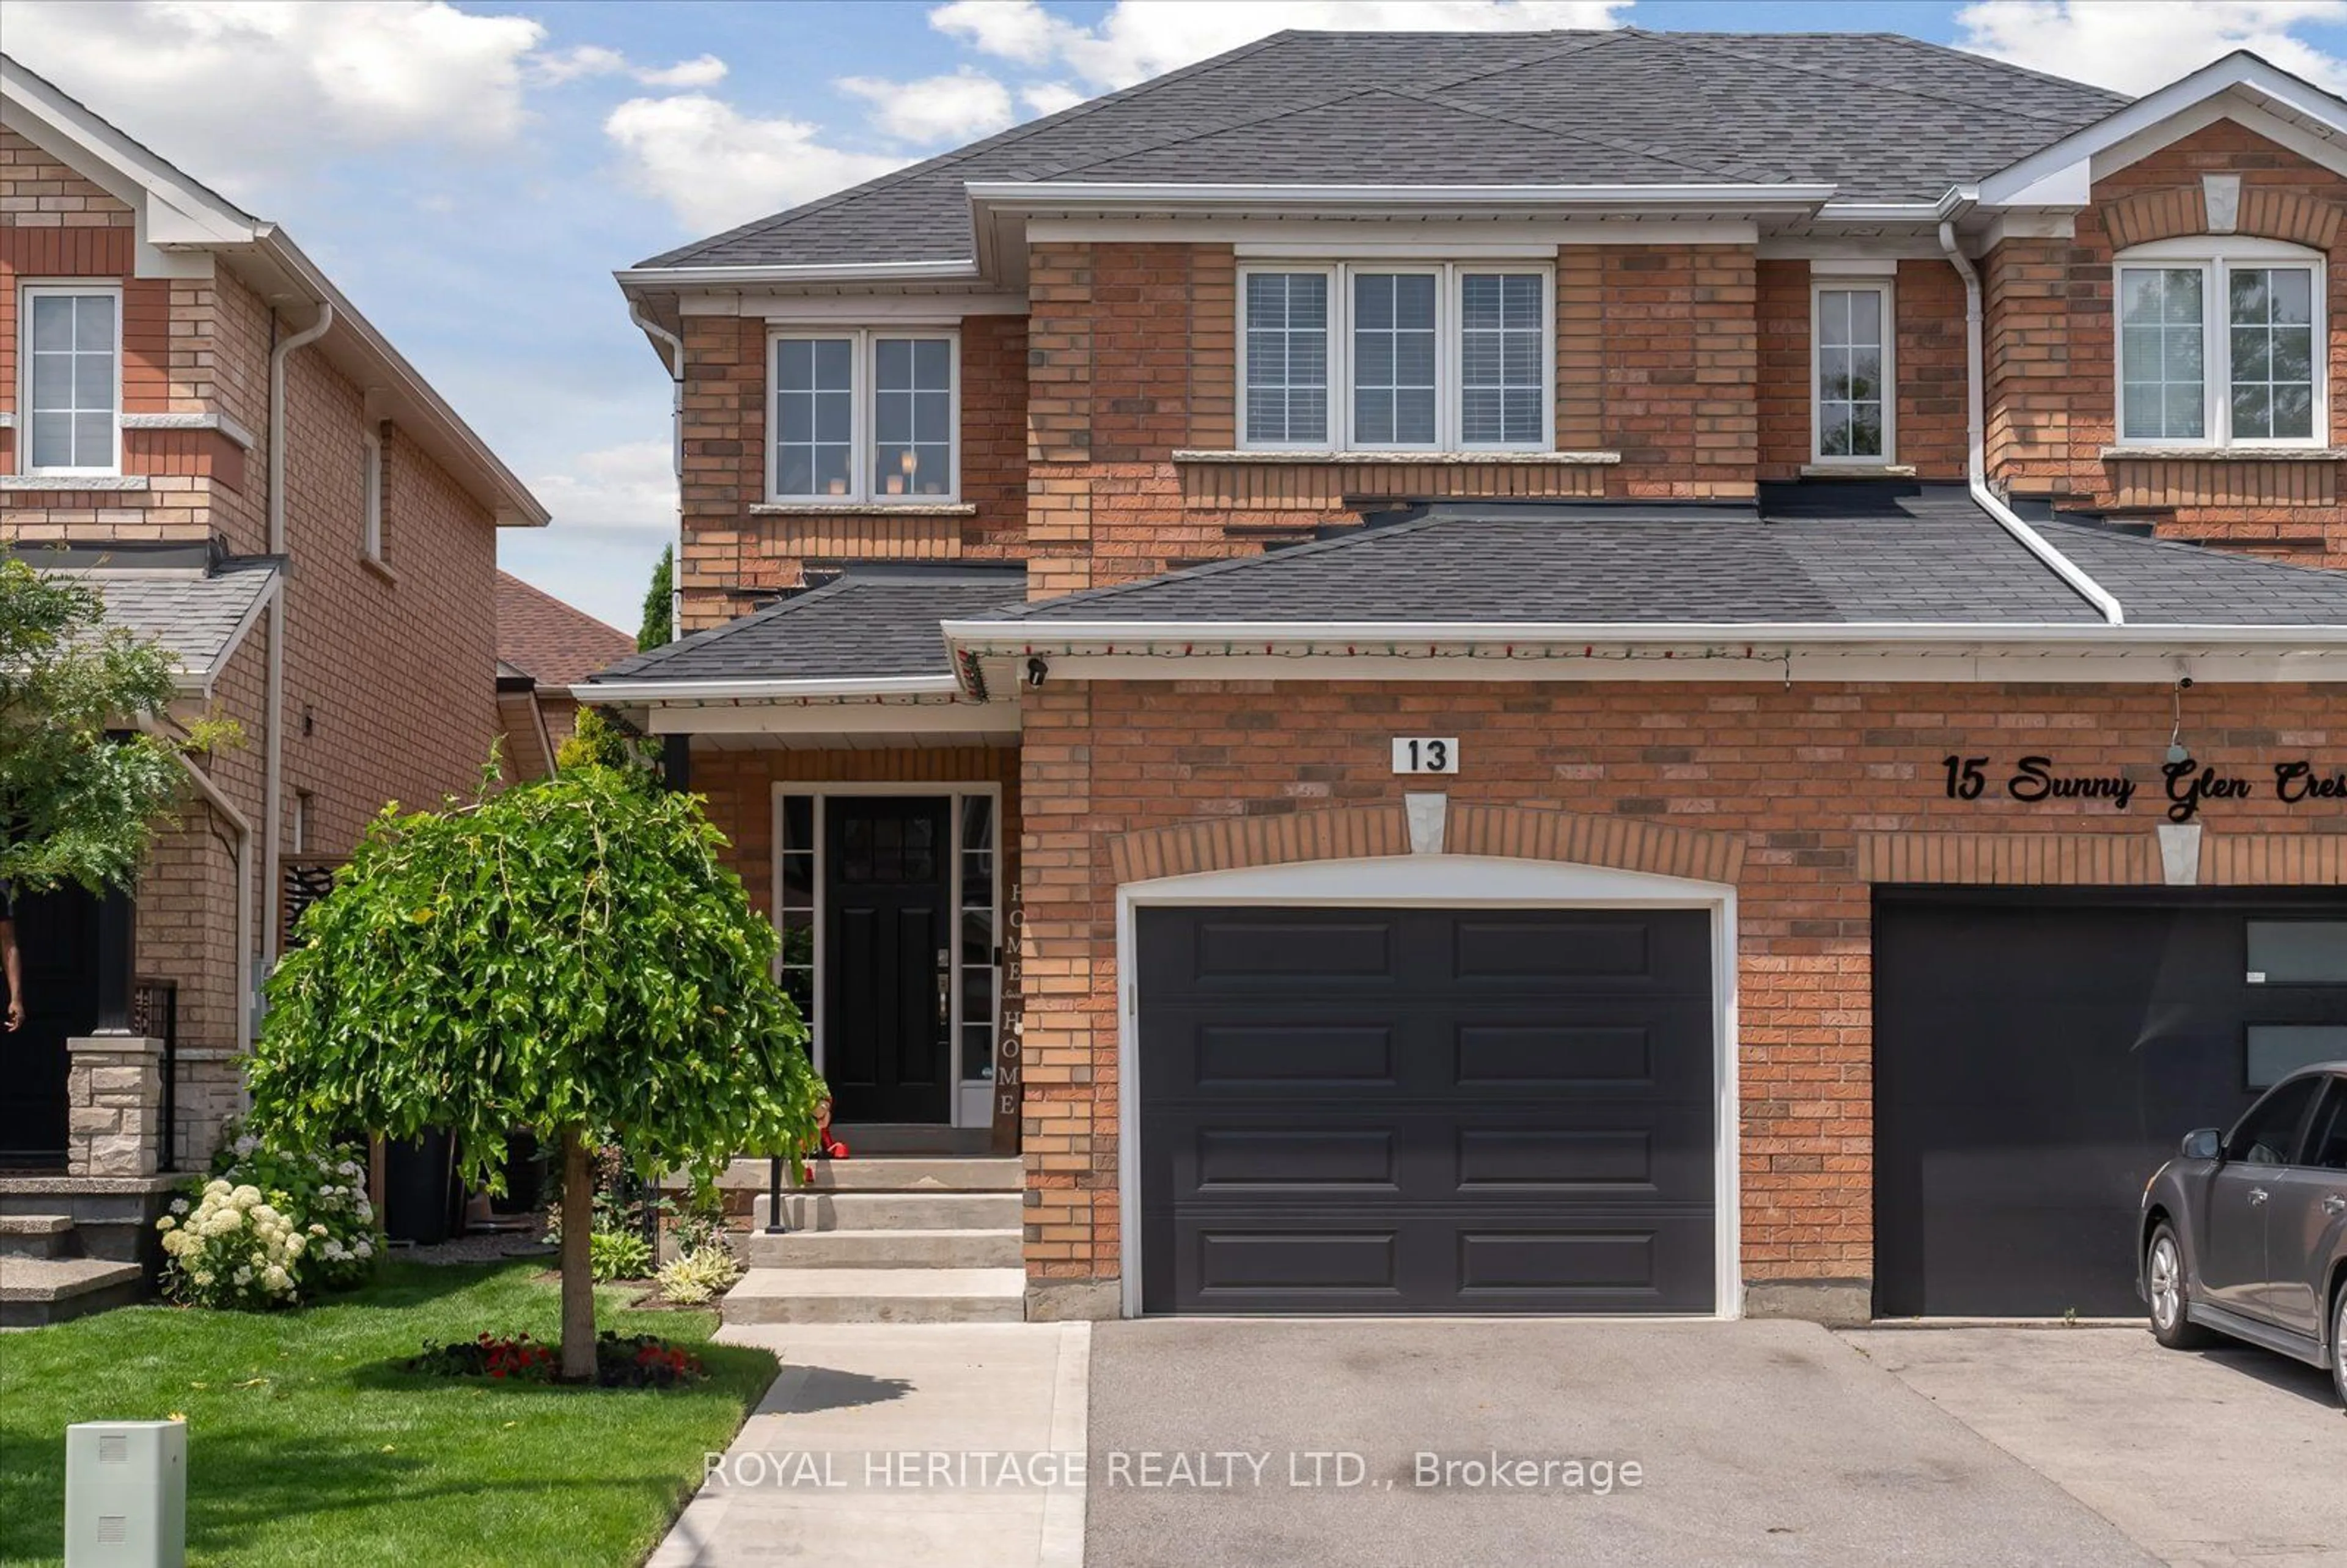 Home with brick exterior material for 13 Sunny Glen Cres, Brampton Ontario L7A 1N5